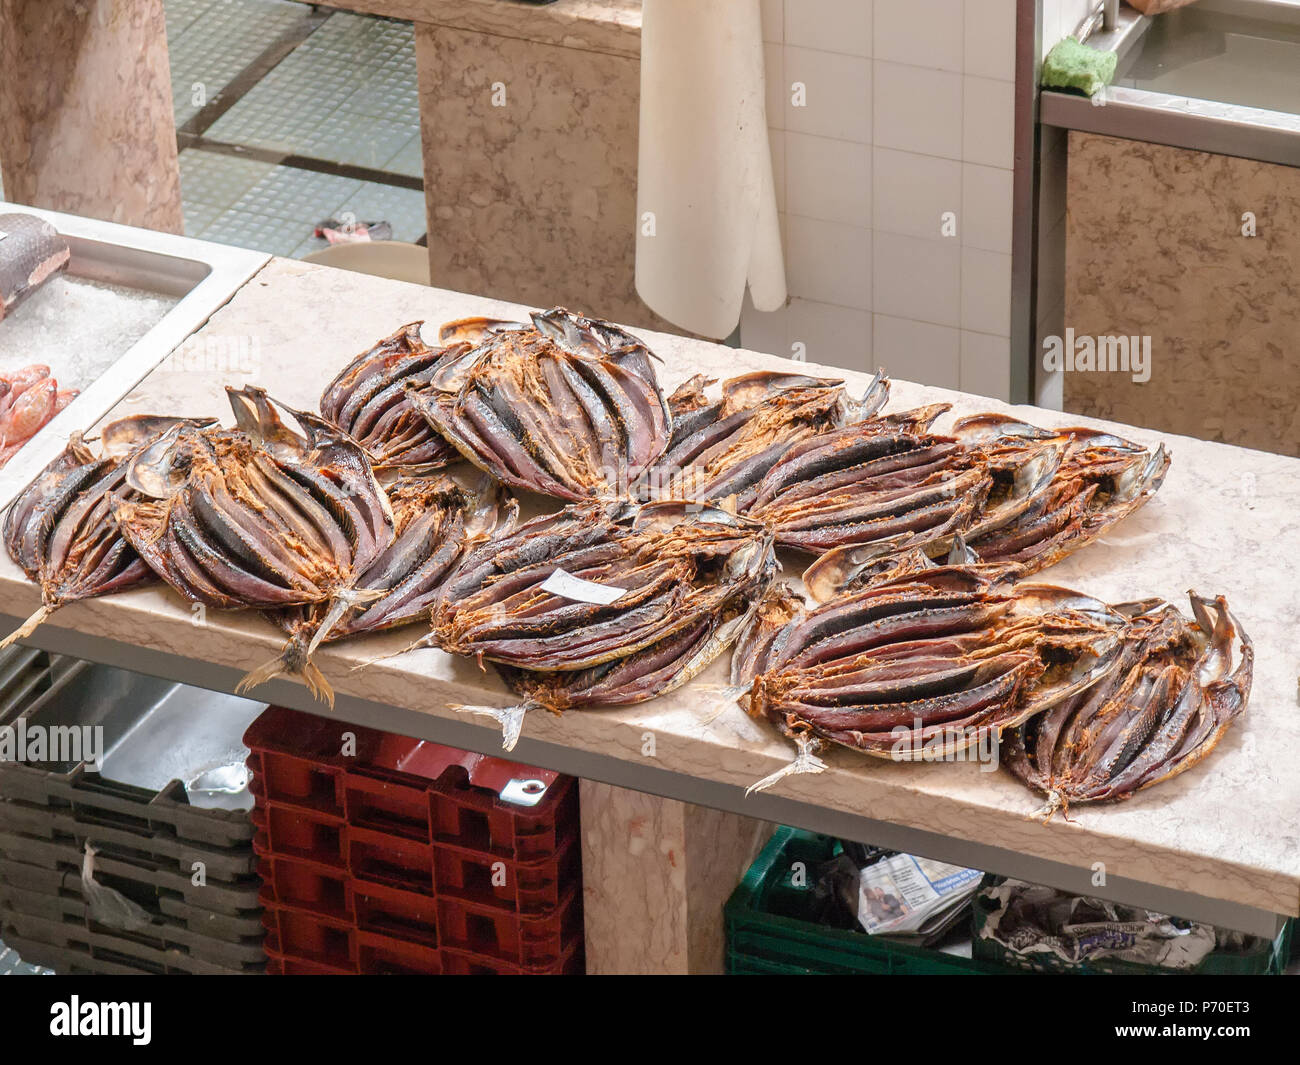 Fish market in Funchal, Madeira Stock Photo